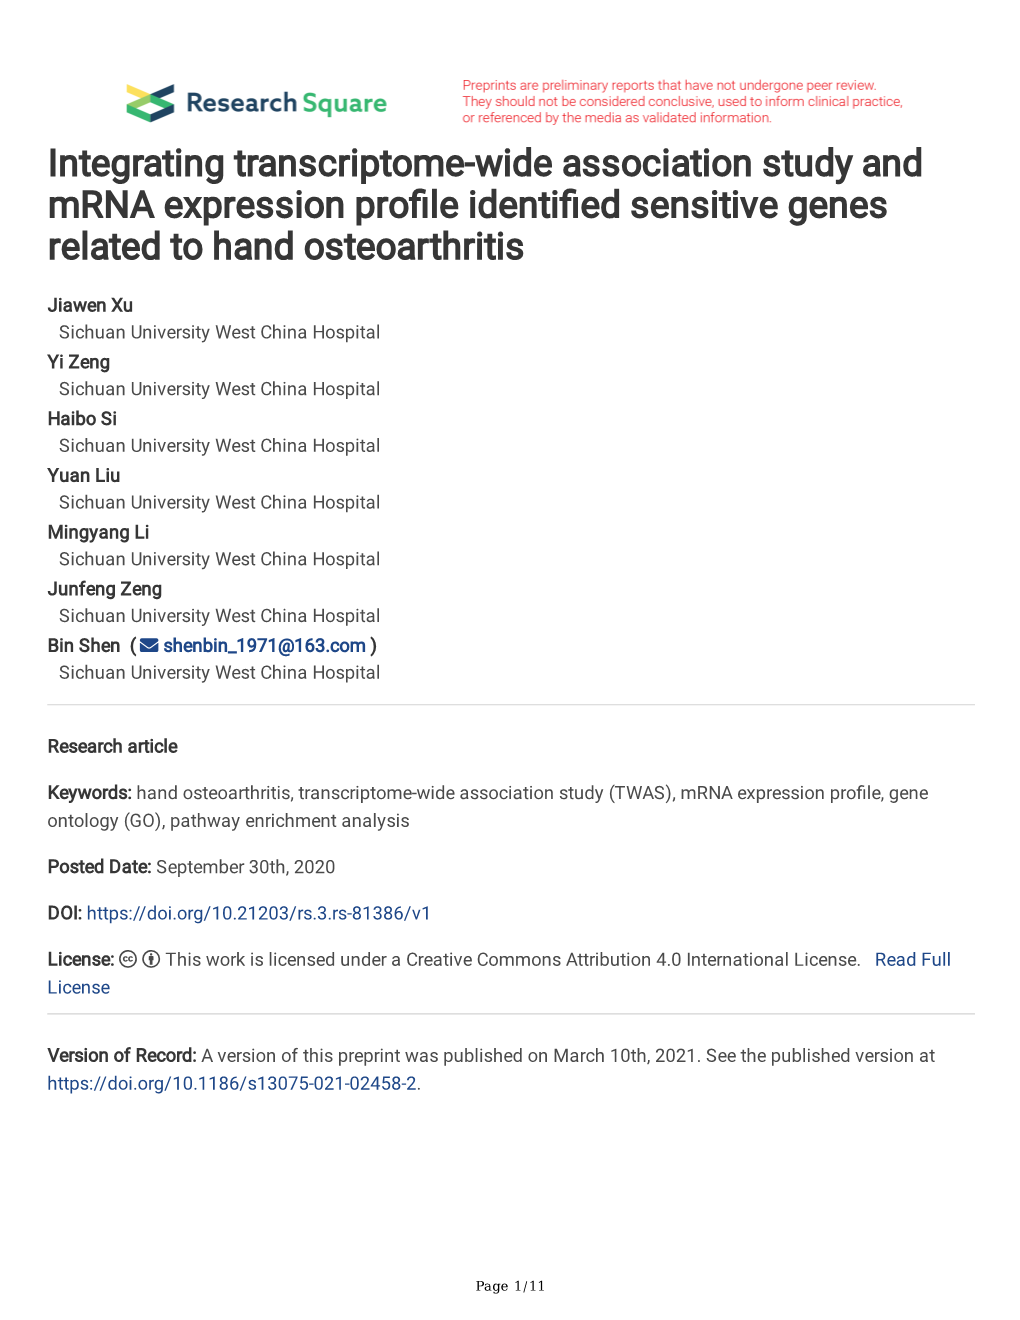 Integrating Transcriptome-Wide Association Study and Mrna Expression Profle Identifed Sensitive Genes Related to Hand Osteoarthritis